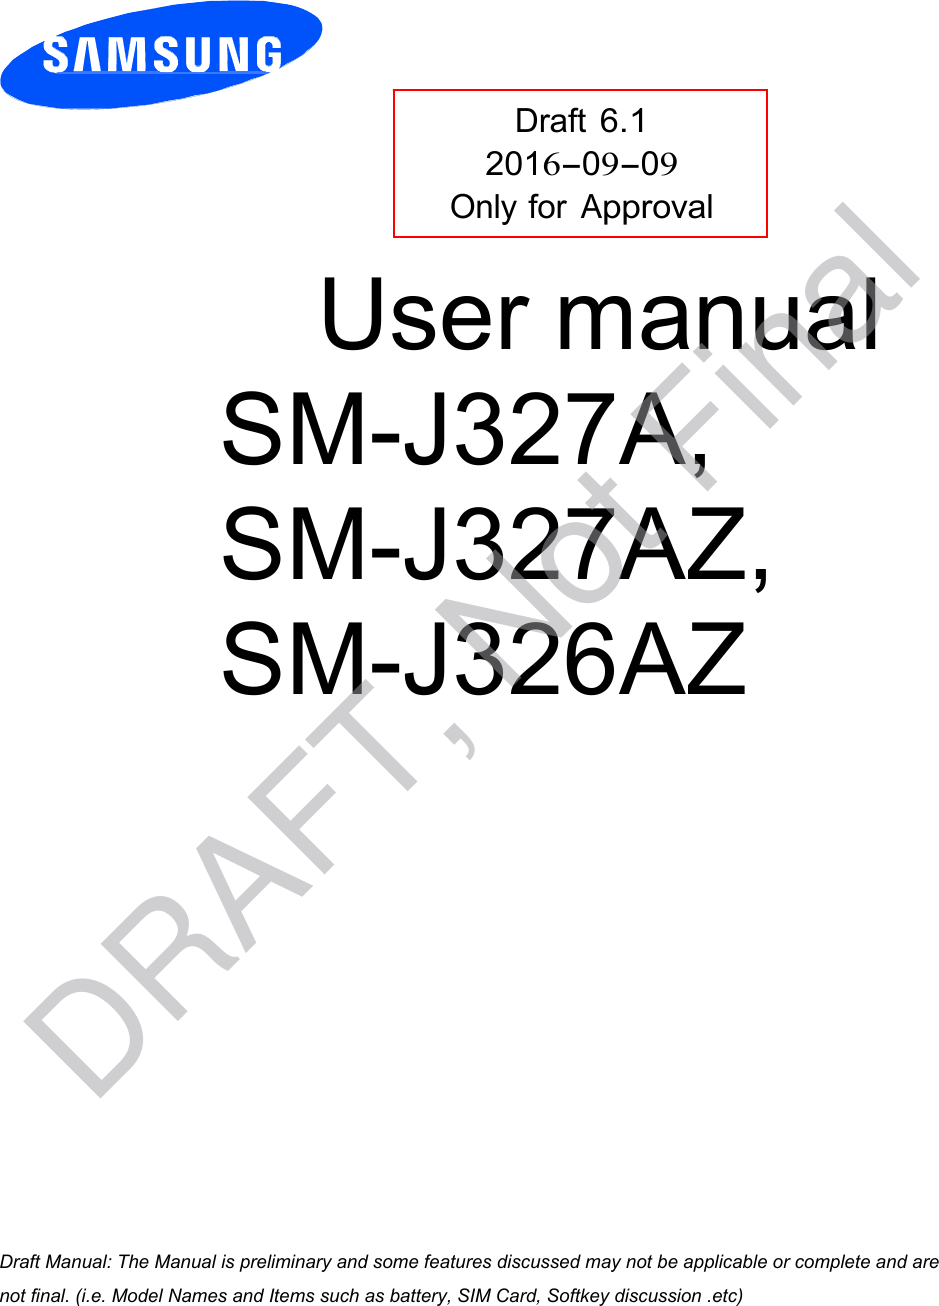 Draft 6.1 2016-09-09 Only for Approval User manual SM-J327A, SM-J327AZ, SM-J326AZ a ana  ana  na and  a dd a n  aa   and a n na  d a and   a a  ad  dn DRAFT, Not Final